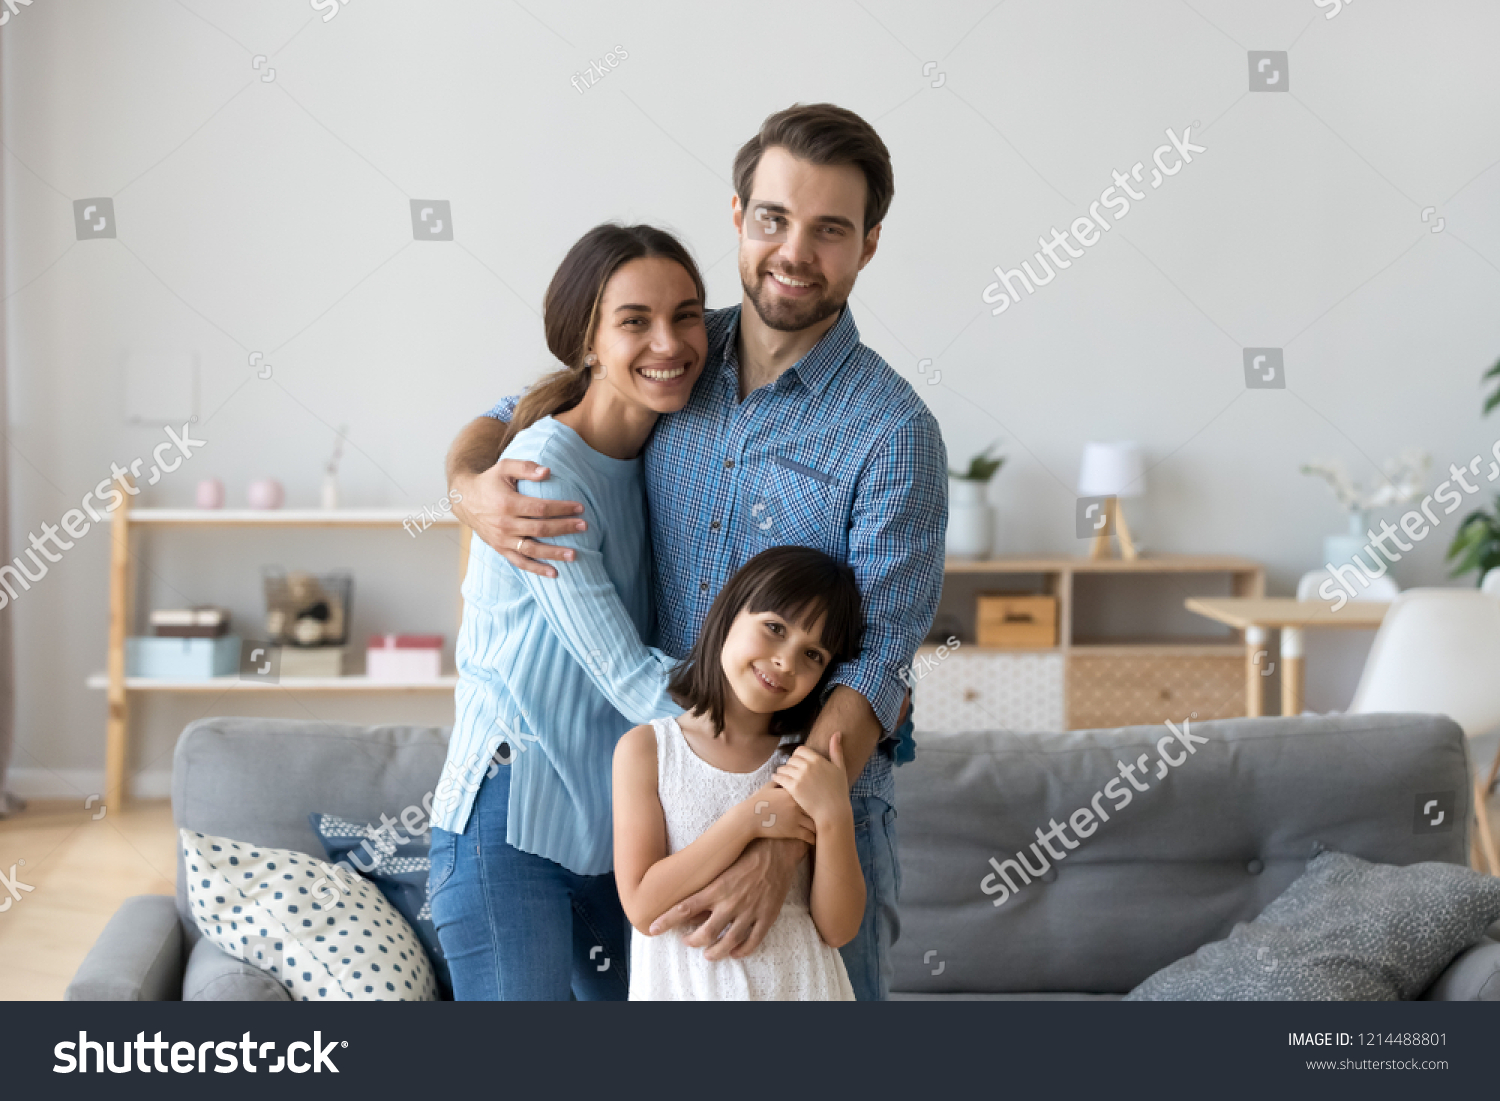 Cheerful diverse multi-ethnic family married couple wife husband little daughter embracing standing together in living room smiling looking at camera at new modern home feels happy and satisfied #1214488801